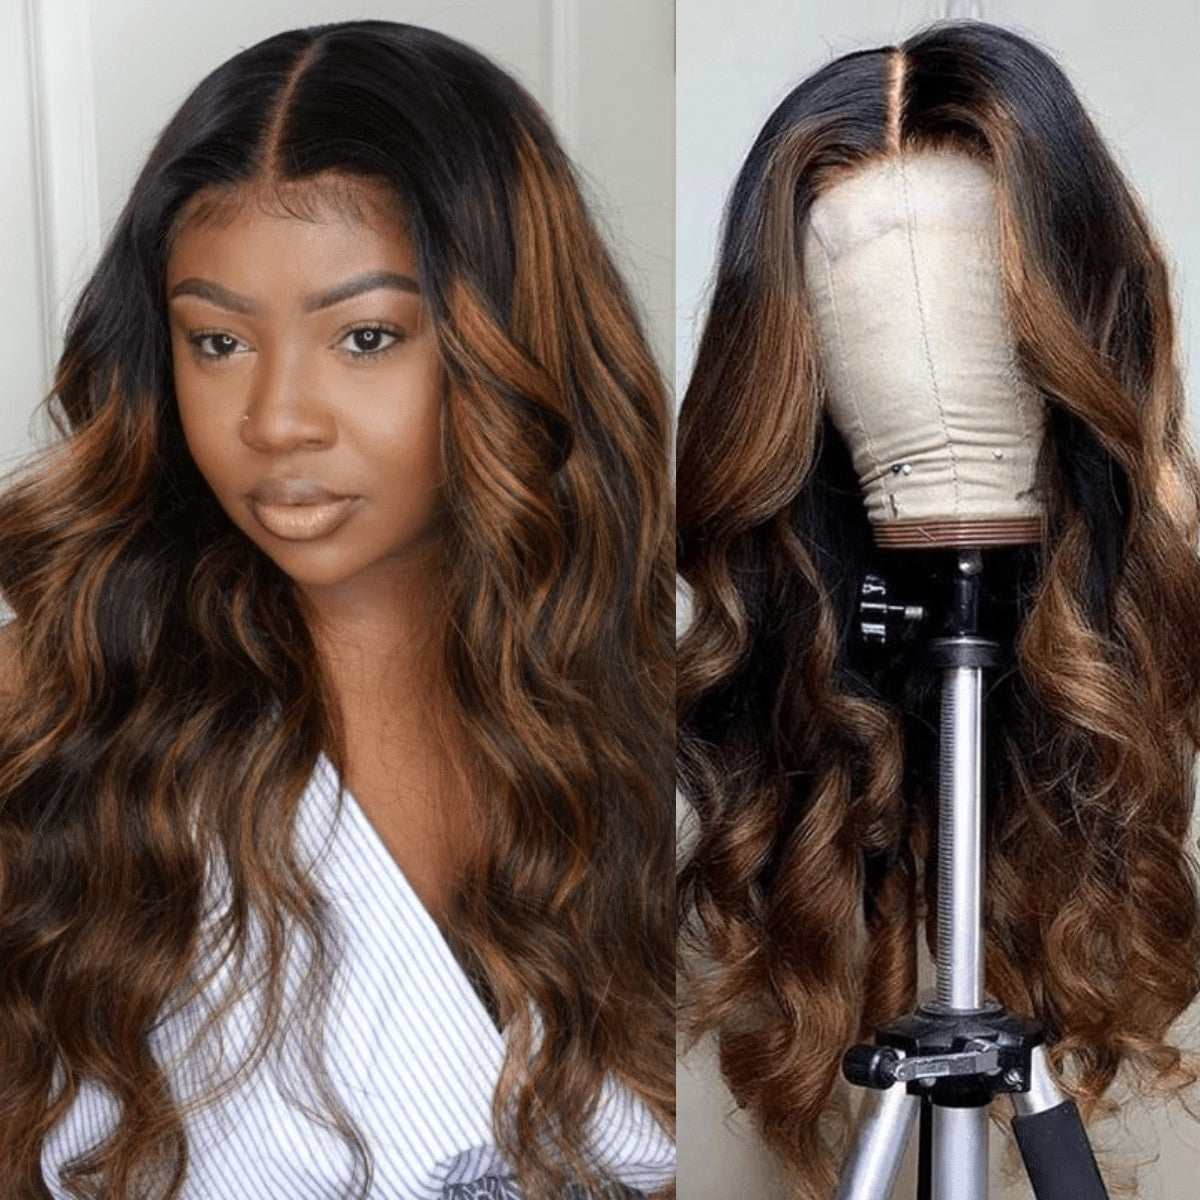 Urgirl 4x4 13x4 Lace Front Ombre Balayage Highlight Body Wave Wigs FB30 Brown Color Natural Hairline With Baby Hair